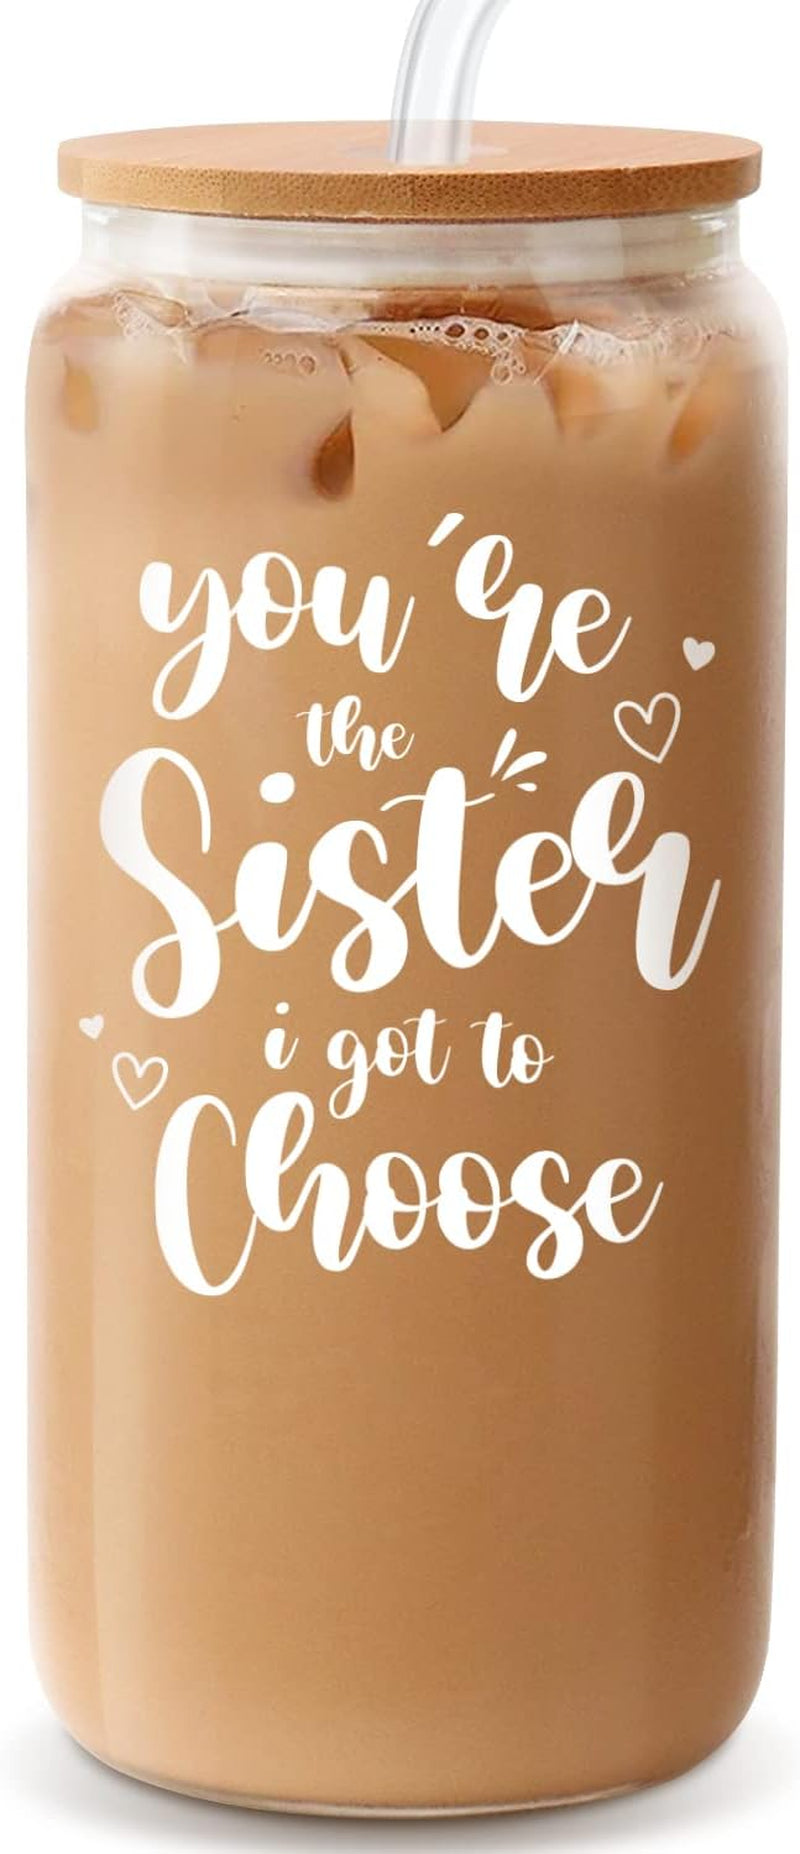 Sisters Gifts from Sister, Friendship Gifts for Women Friends, Gifts for Sister, Best Friend Birthday Gifts, Birthday Gifts for Sister, Friend Gifts, Bestie Gifts - 18 oz Coffee Glass(Sister 1)